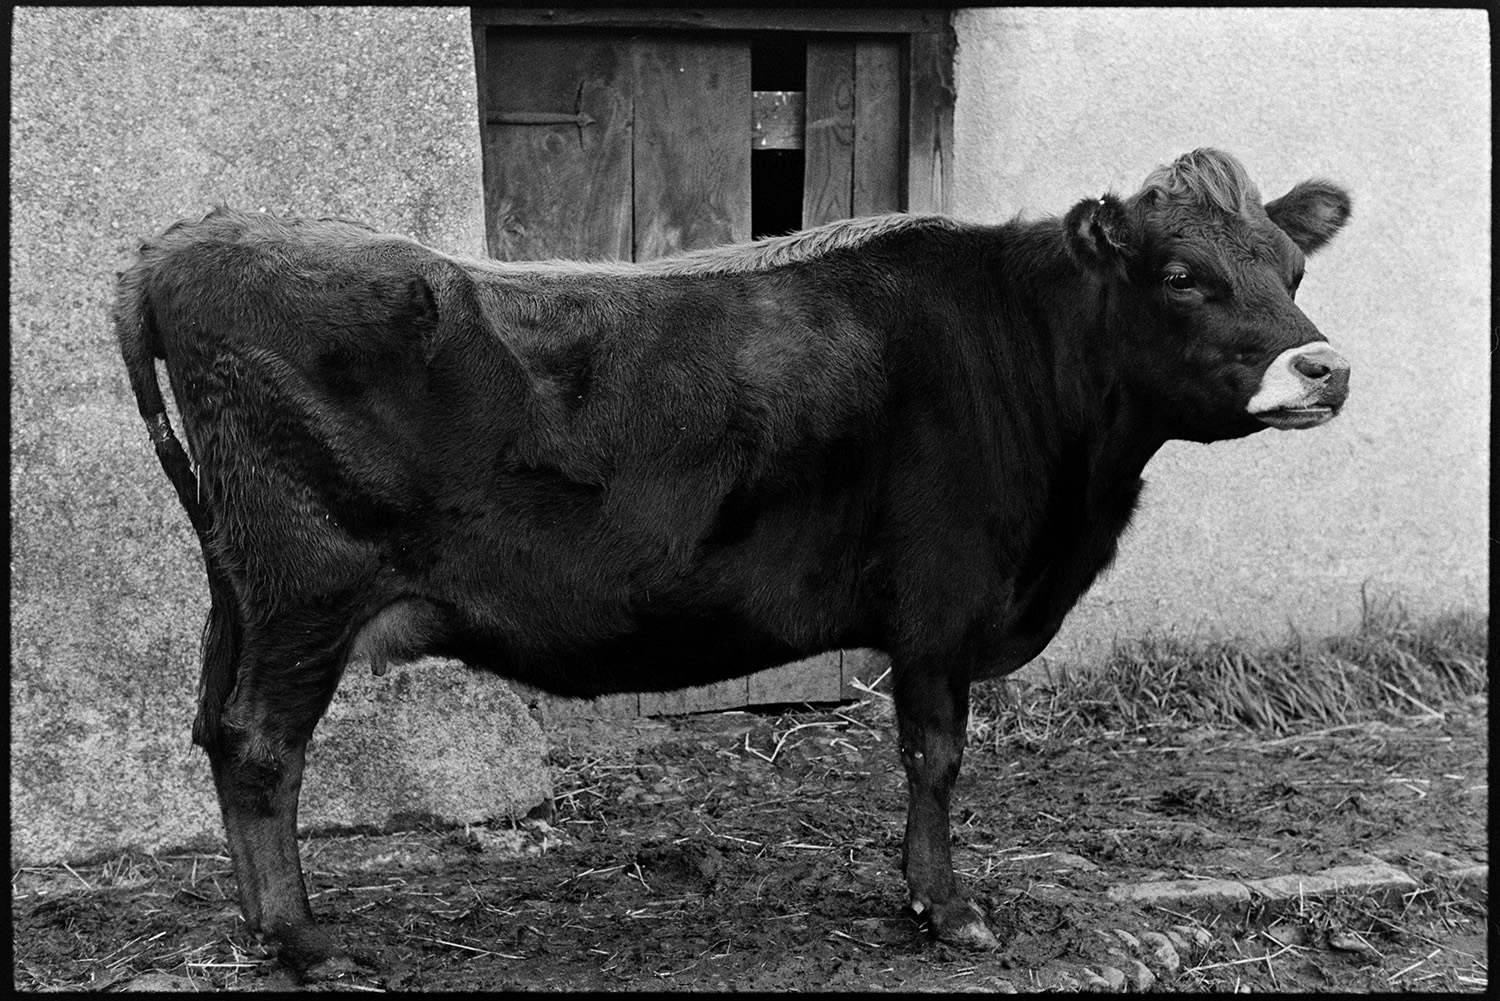 Cow in profile. 
[A cow stood in a muddy farmyard in front of the wooden door, at Parsonage, Iddesleigh.]